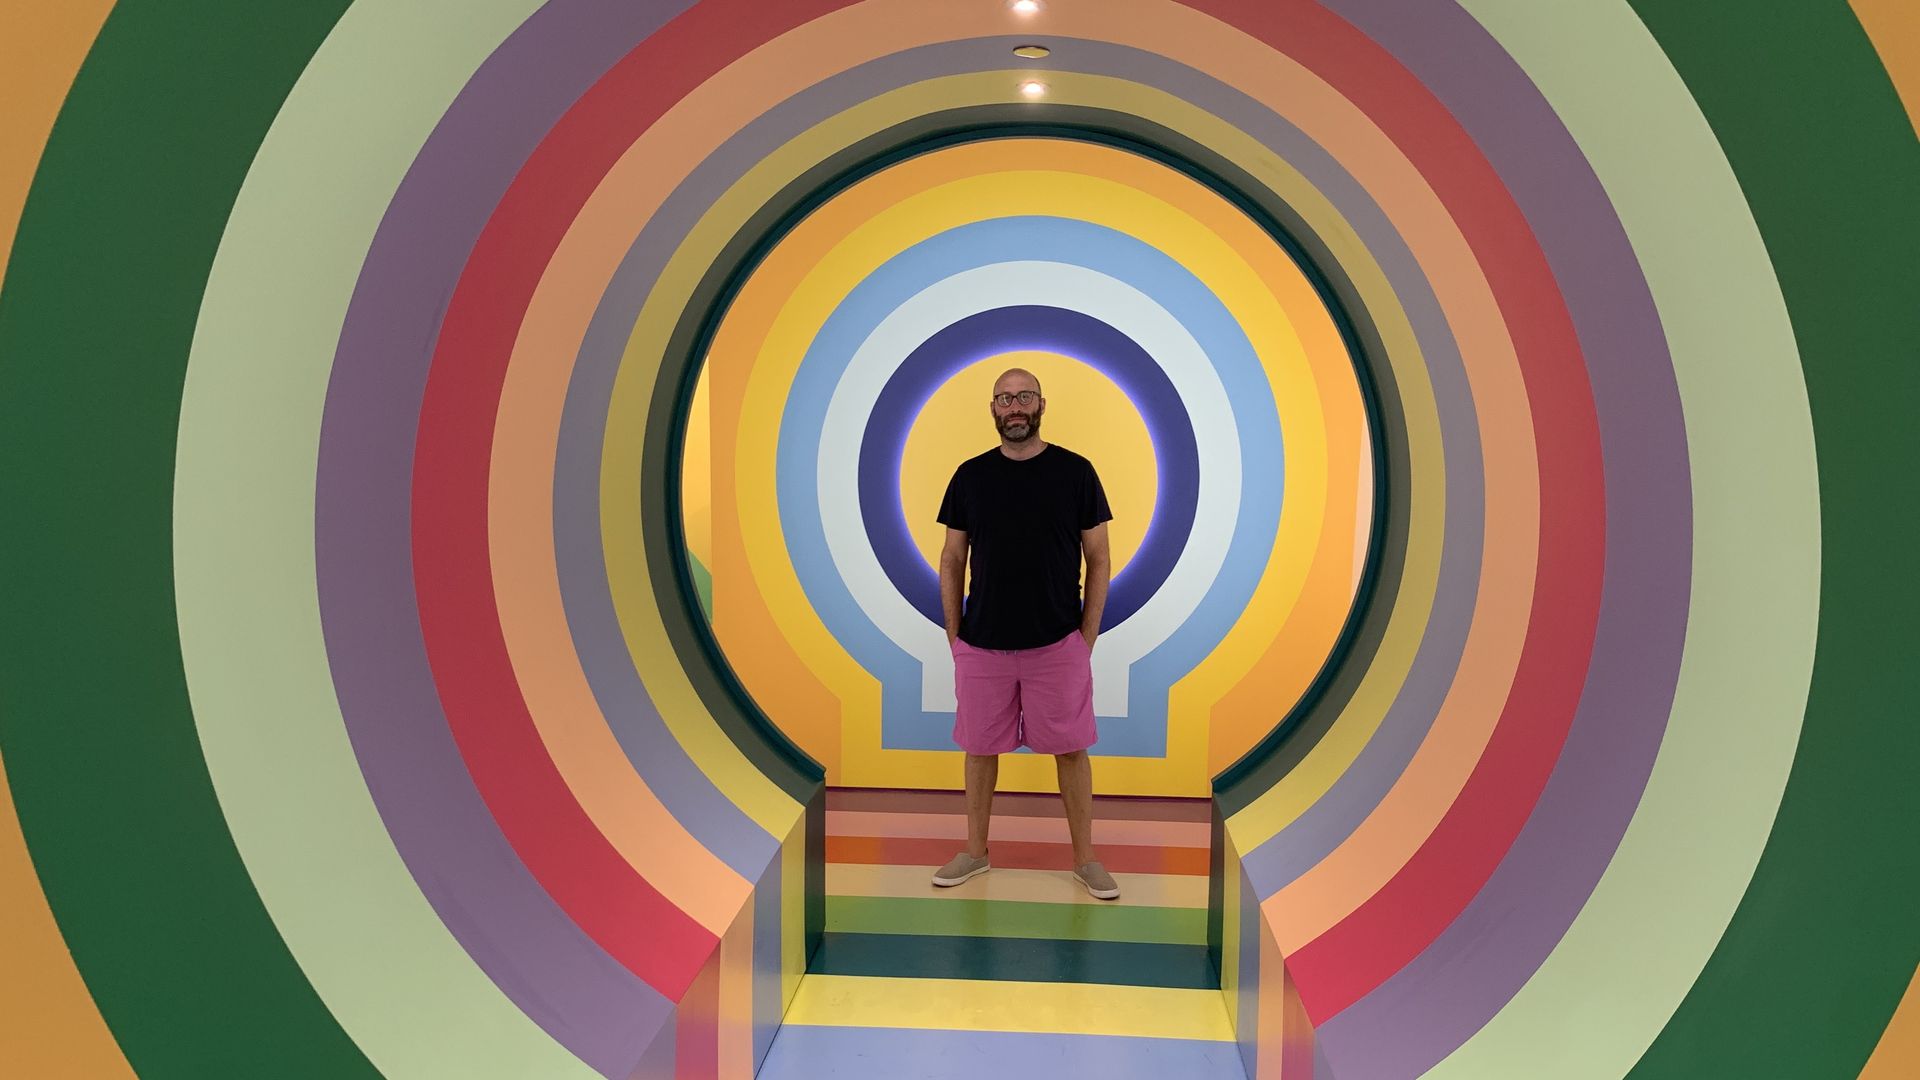 Photo of a man standing inside a colorful cylinder